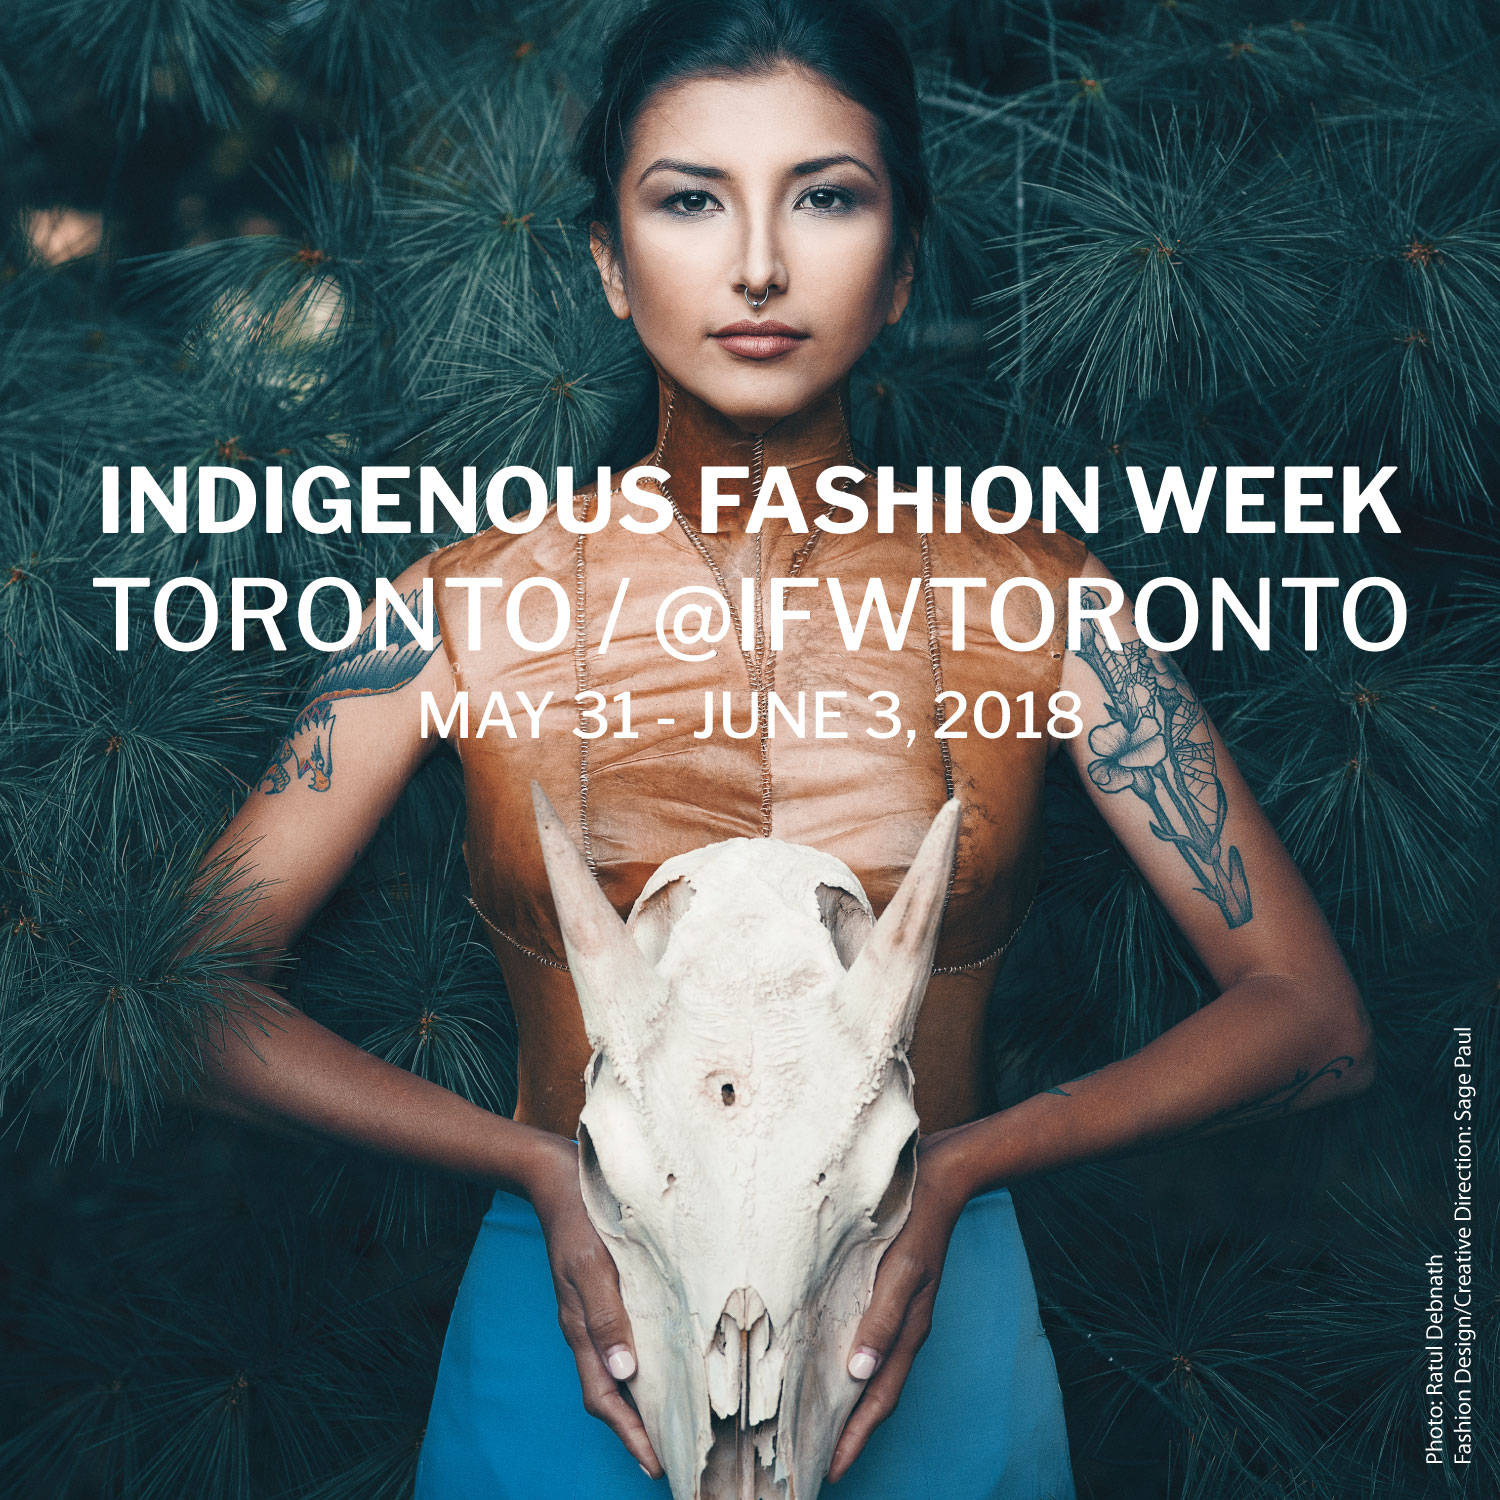 The First Annual INDIGENOUS FASHION WEEK TORONTO